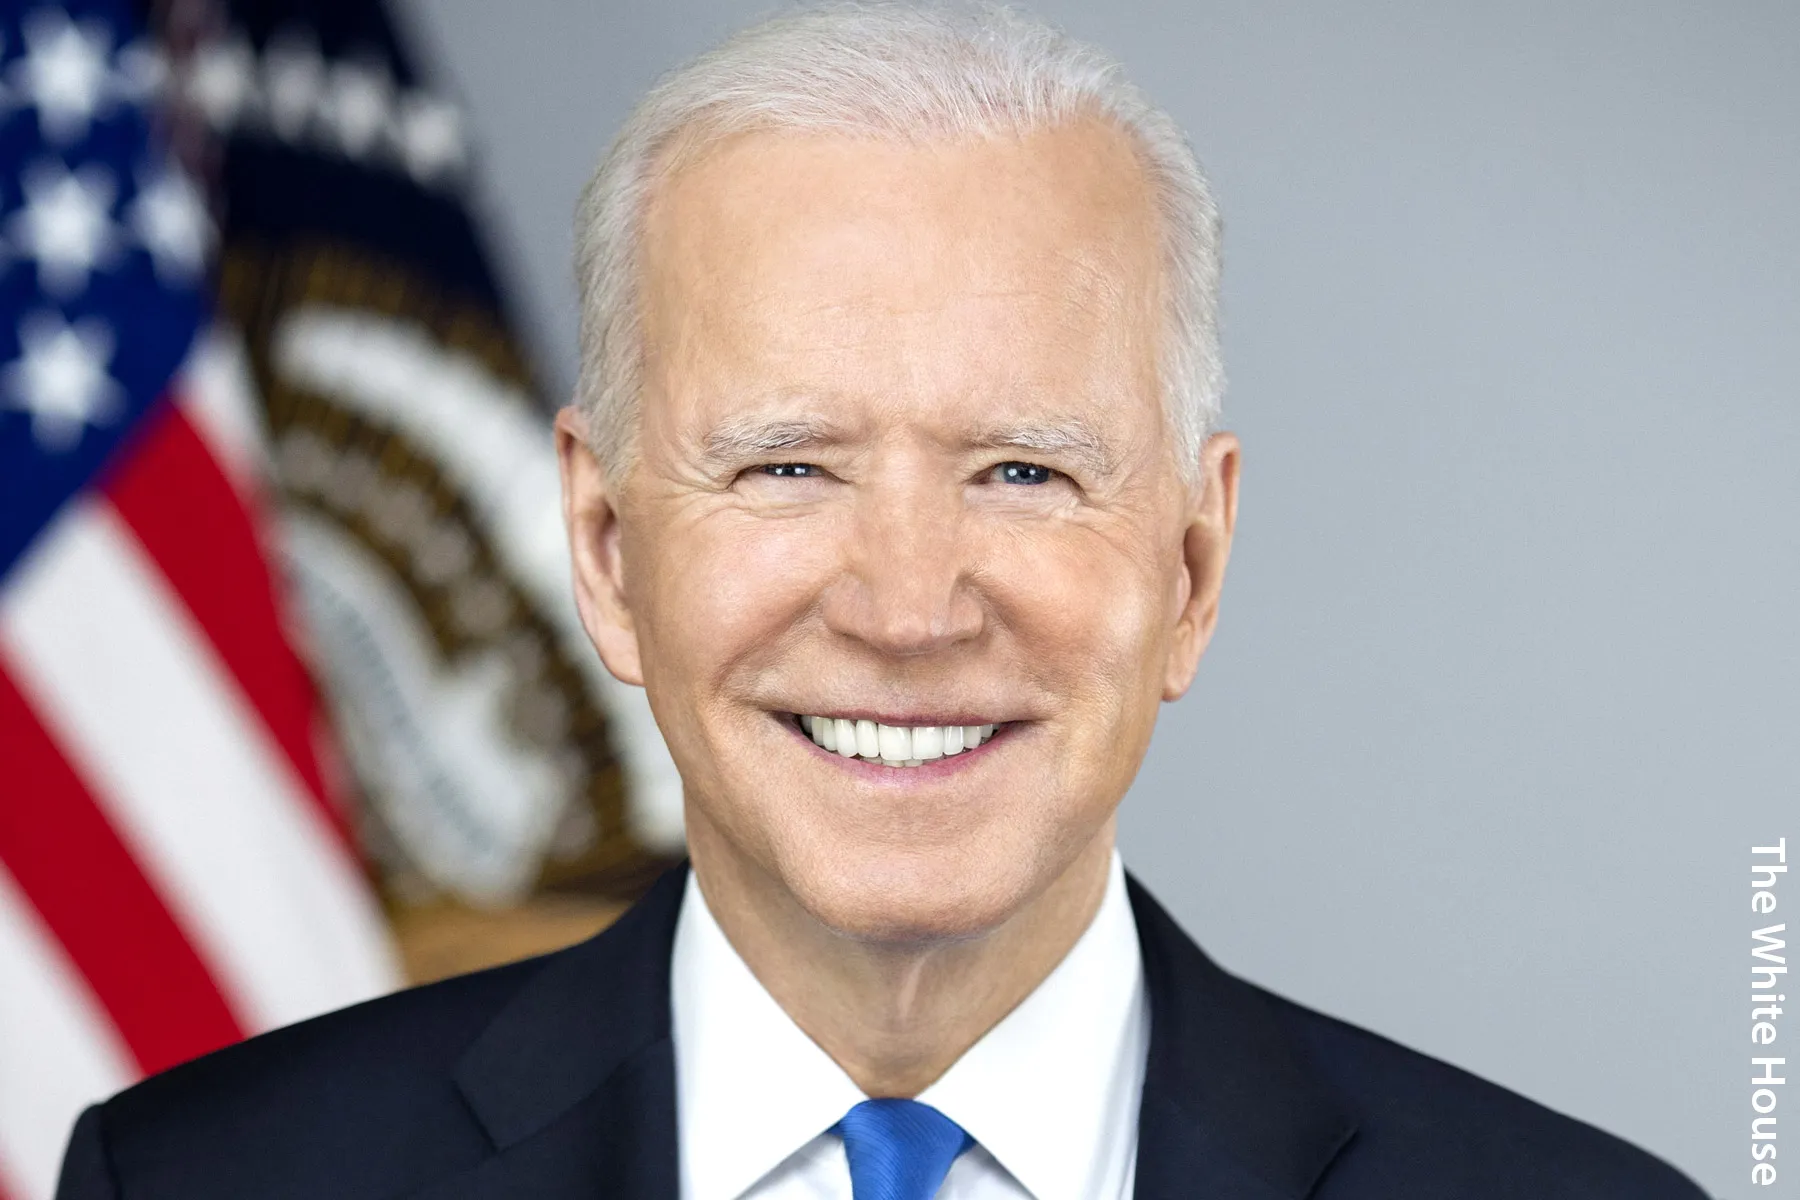 President Biden Tests Negative for COVID-19, Ends Isolation